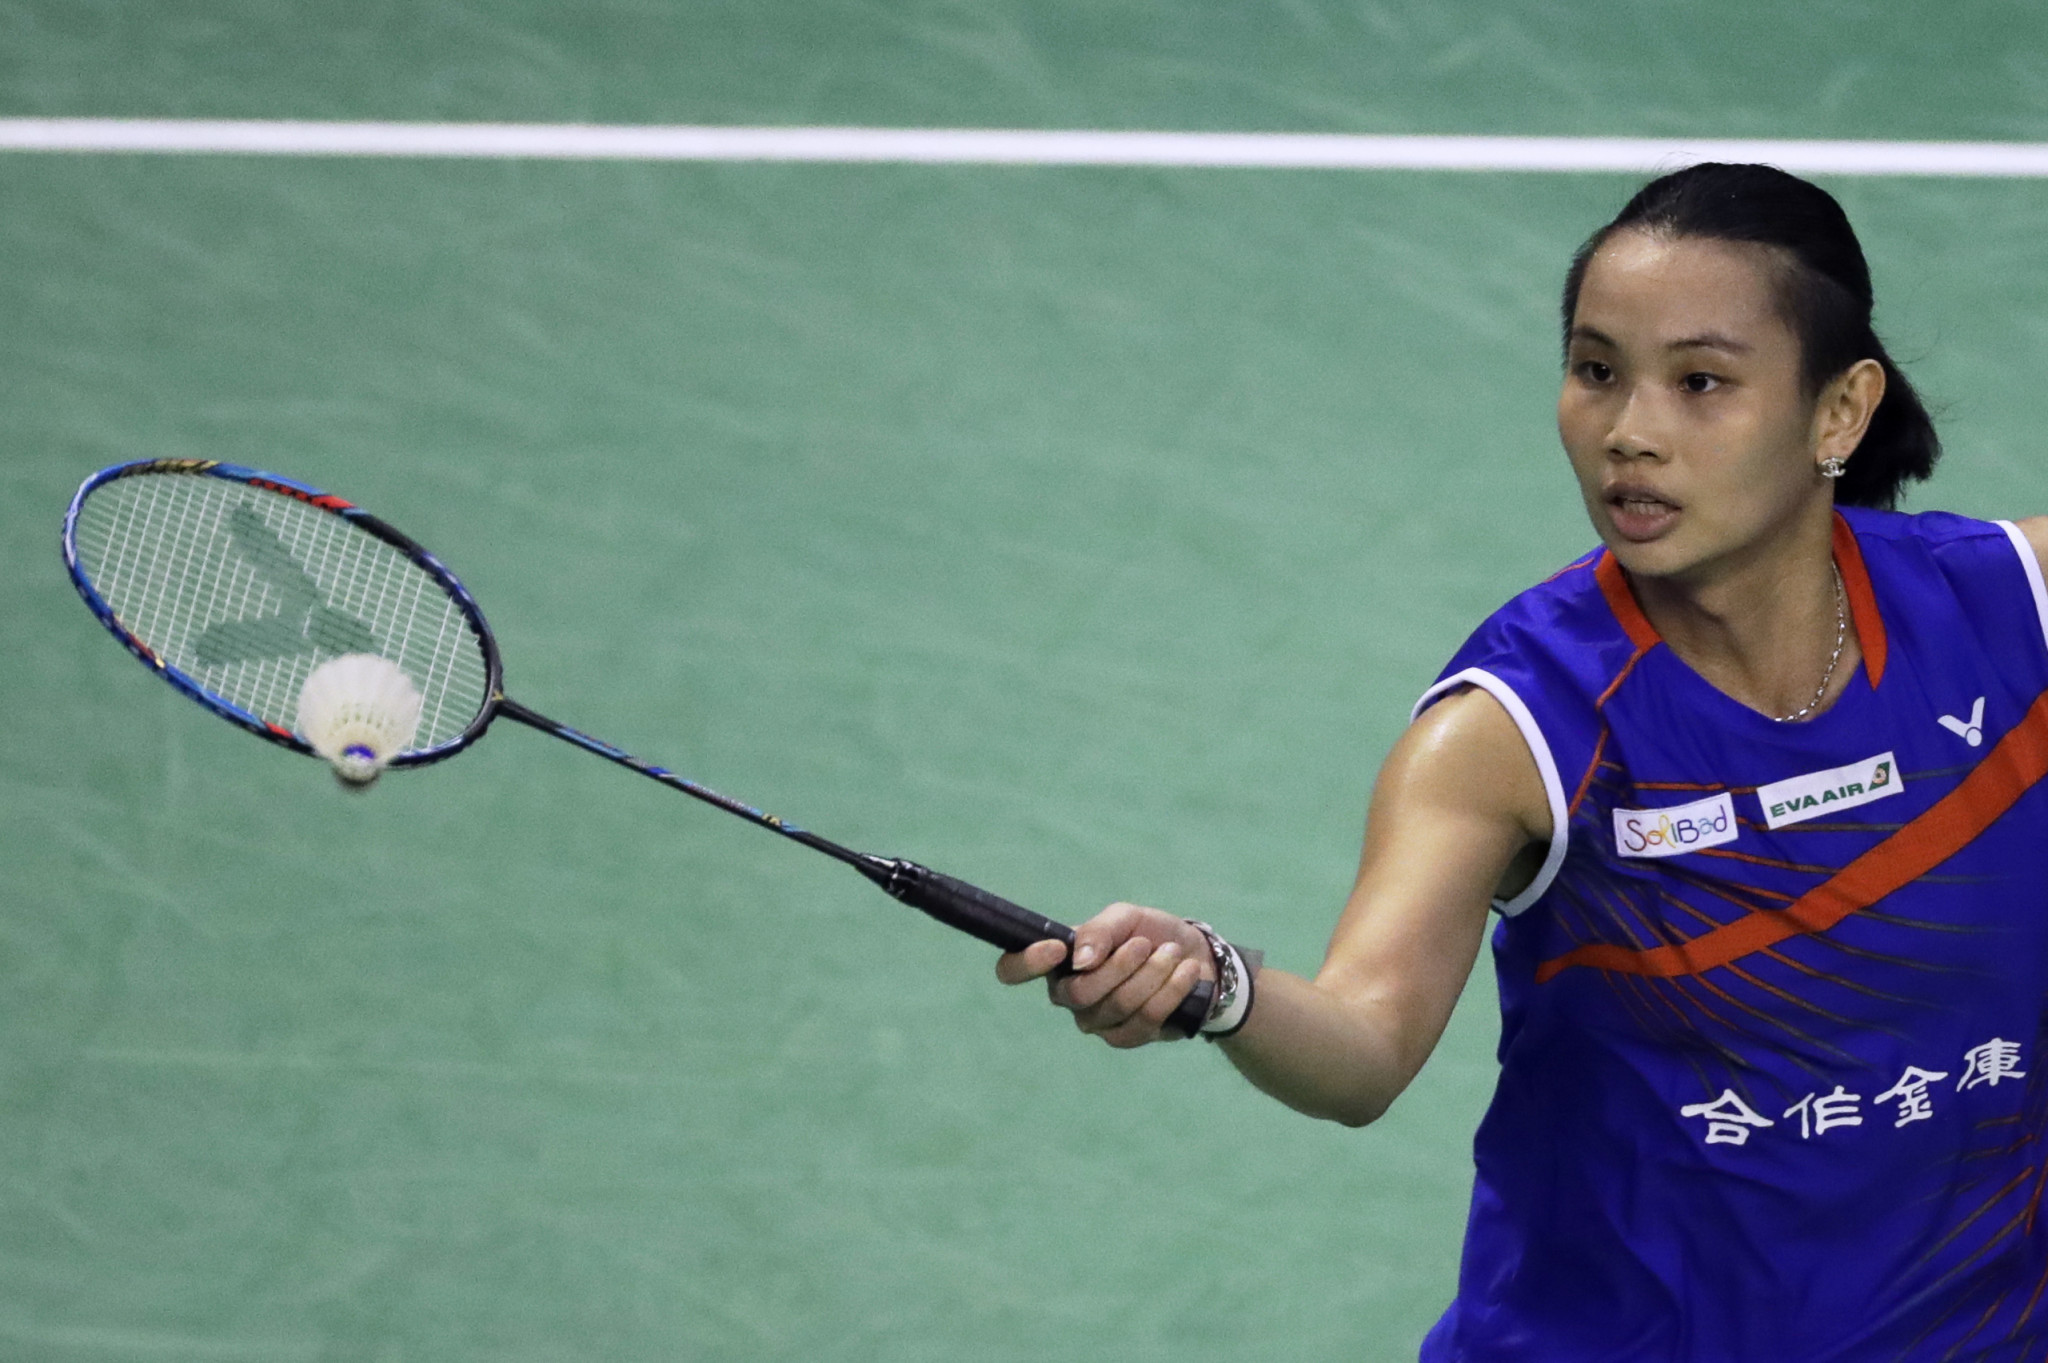 Women's top seed Tai Tzu-ying progressed to round two ©Getty Images